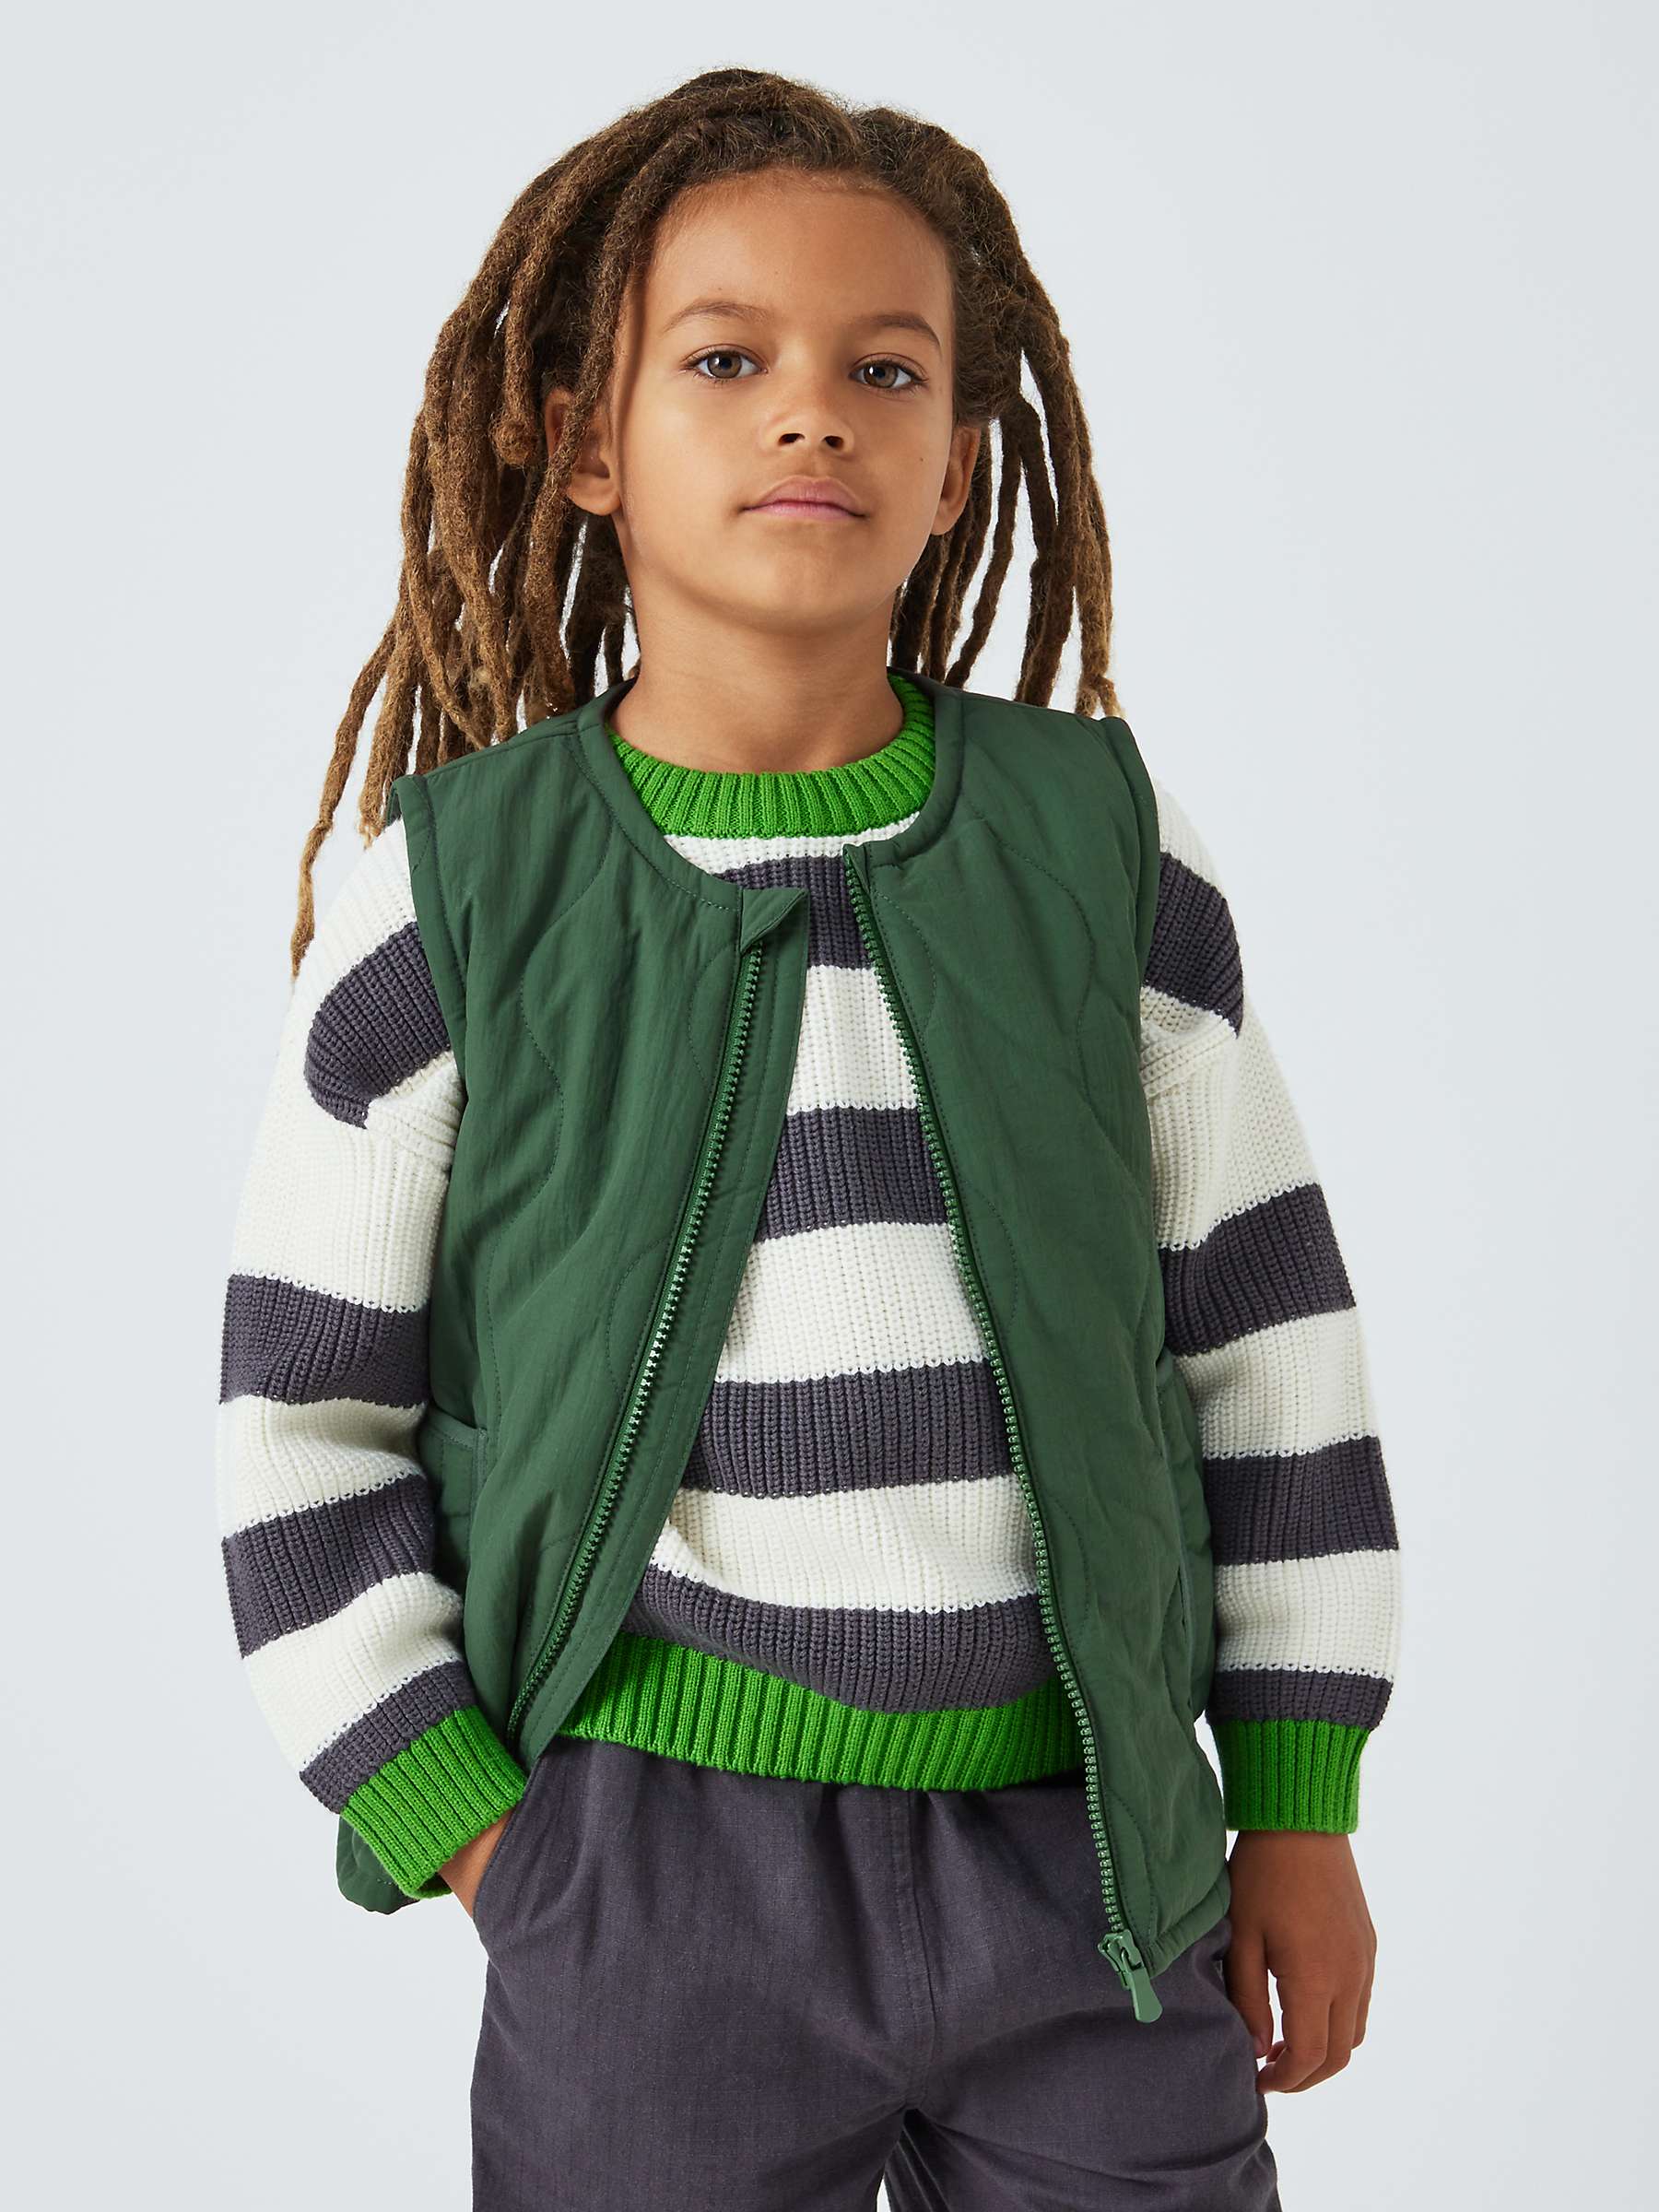 Buy John Lewis ANYDAY Kids' Plain Onion Quilted Gilet, Khaki Online at johnlewis.com